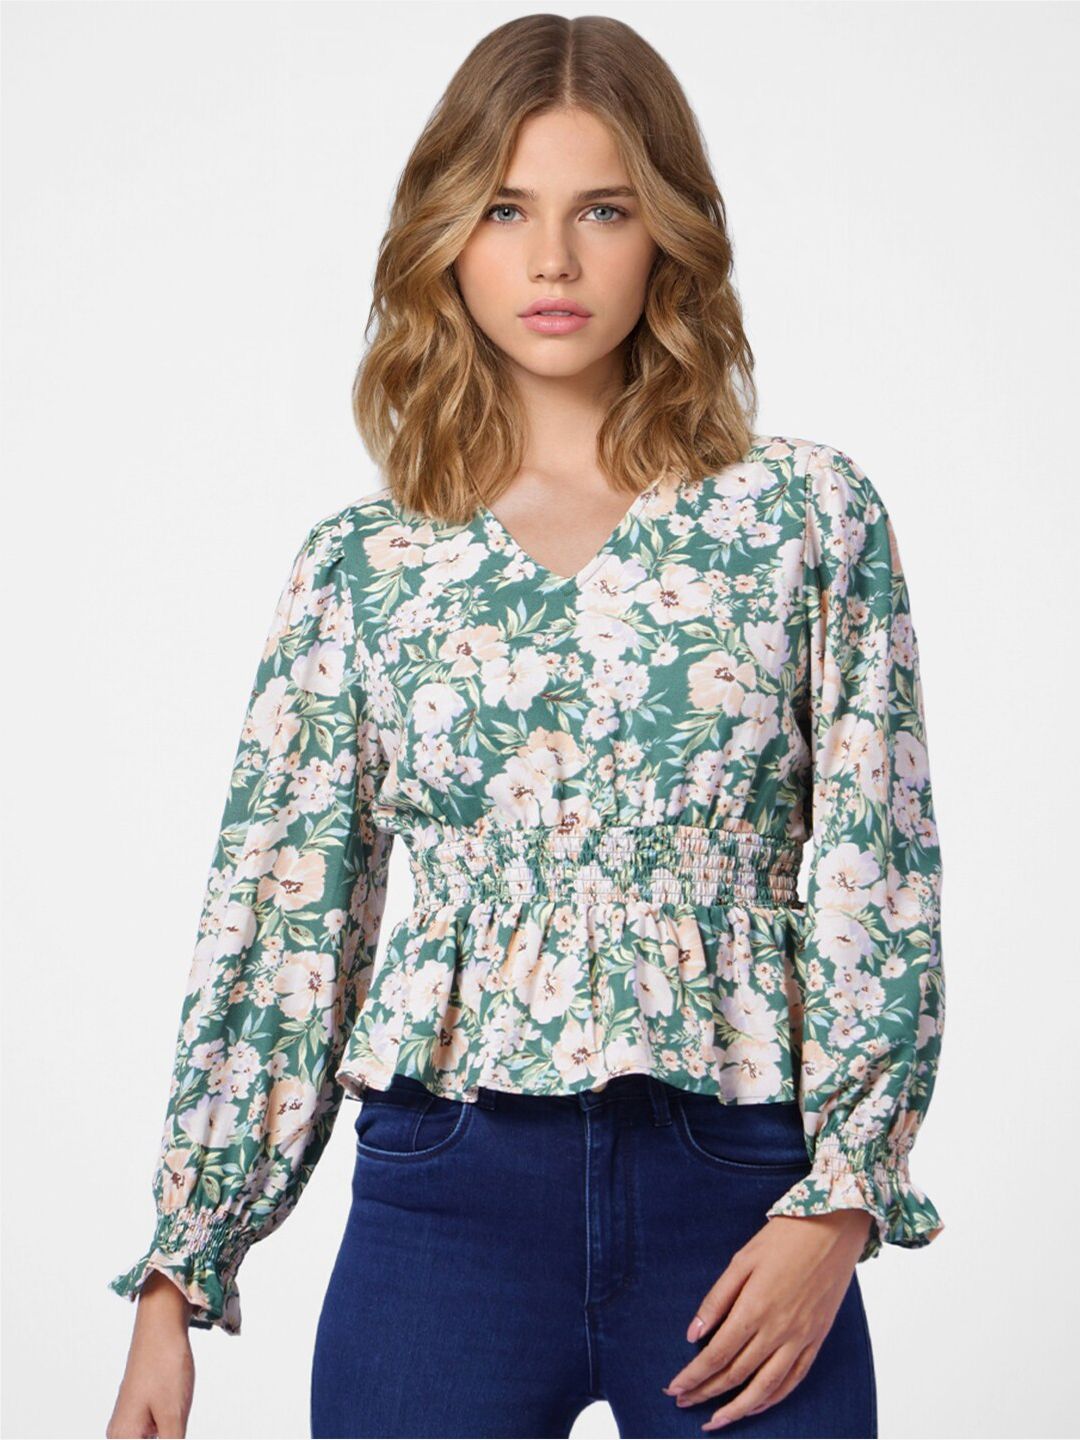 ONLY  Women Green Floral Print Blouson Top Price in India